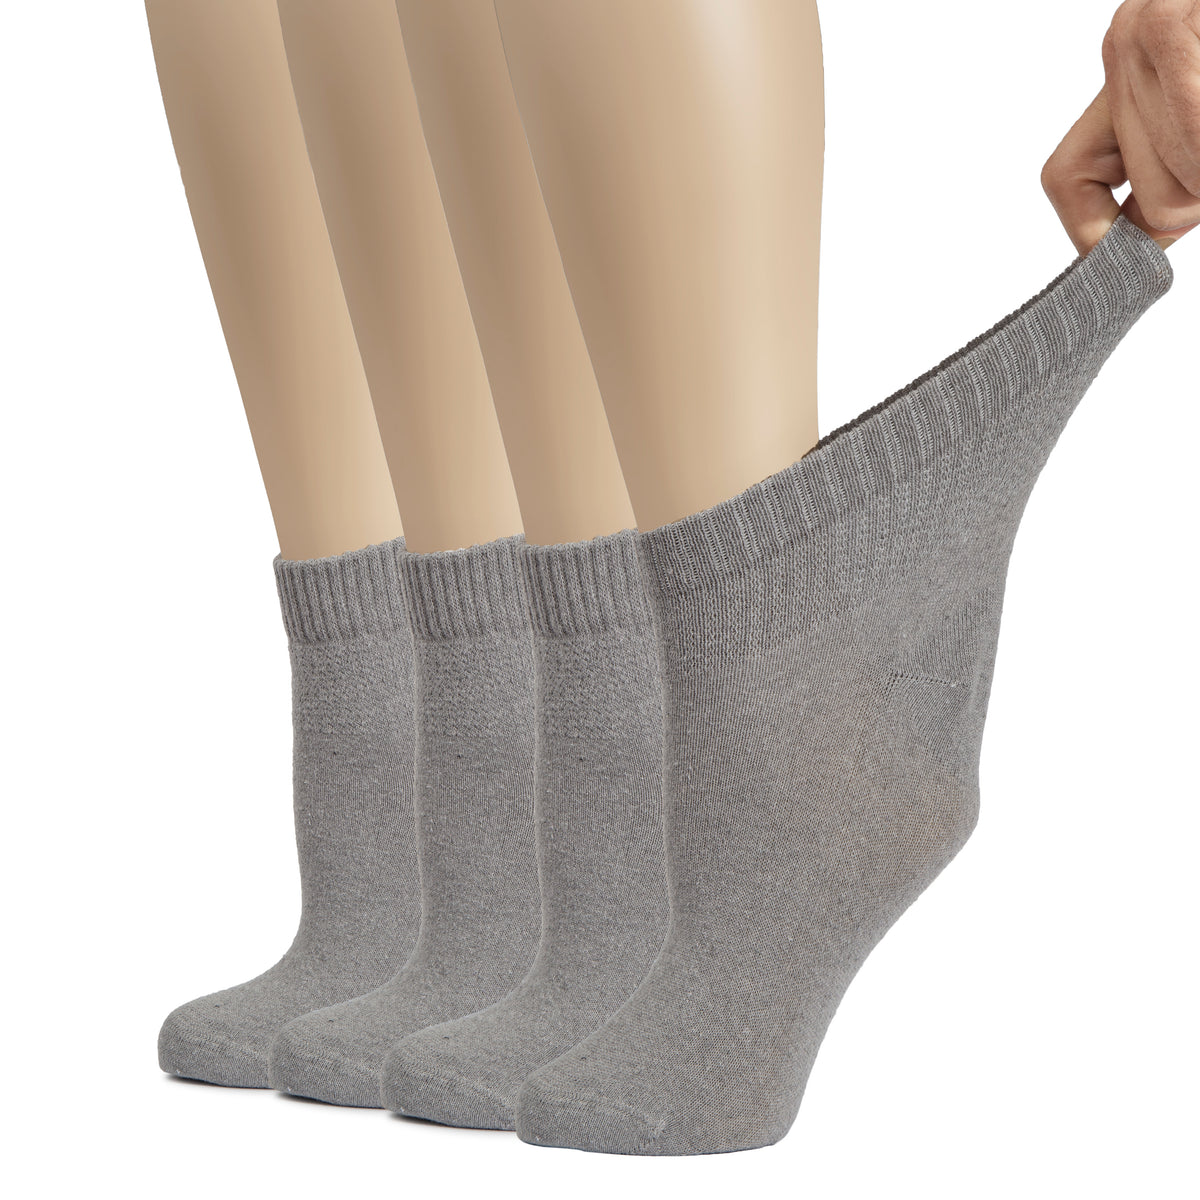 A photo of a woman's feet in grey socks, one foot raised. The socks are Women's Cotton Diabetic Ankle Socks, designed for comfort and support.